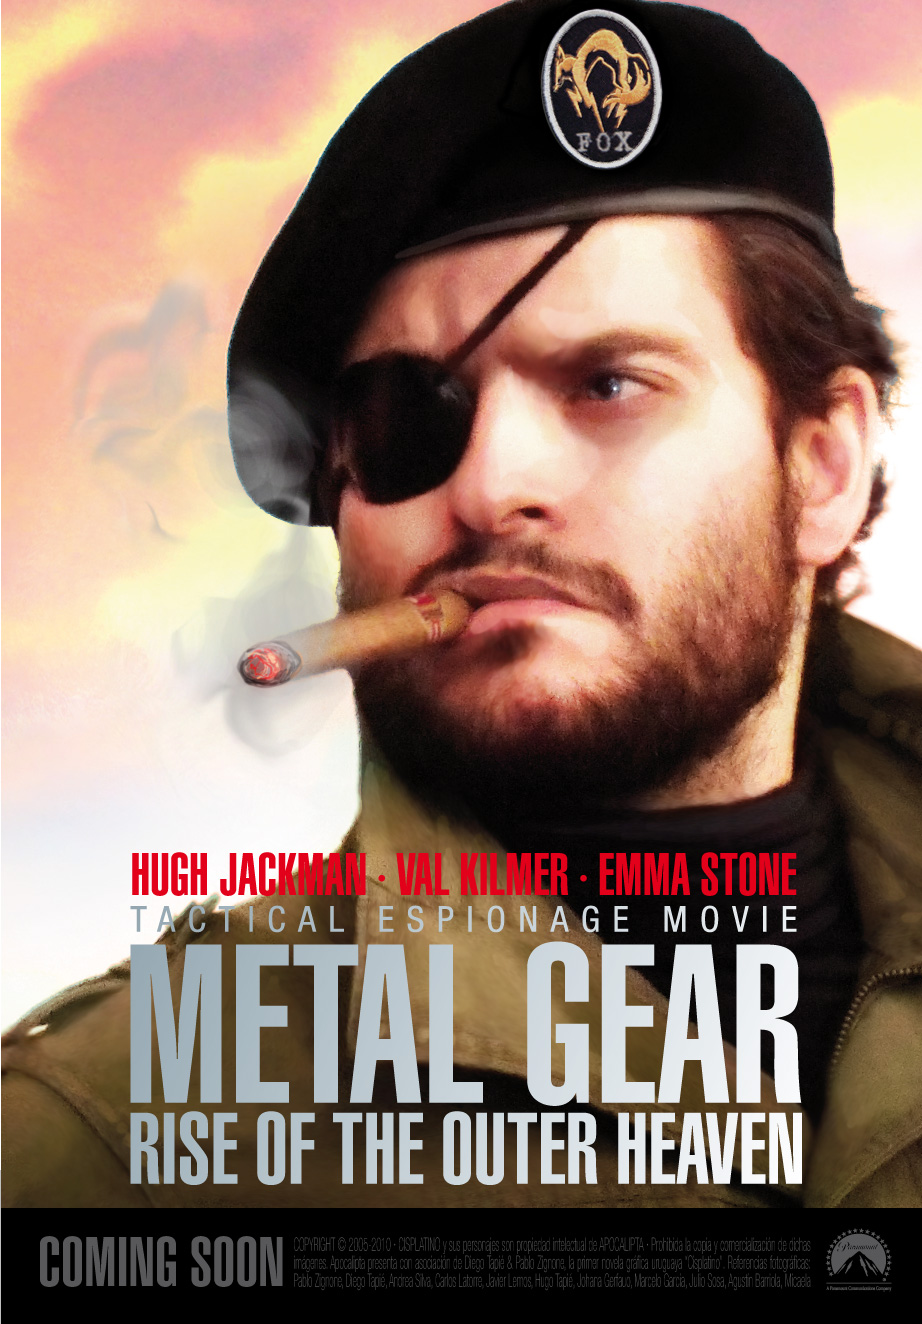 MetalGear: Rise of the Outer Heaven